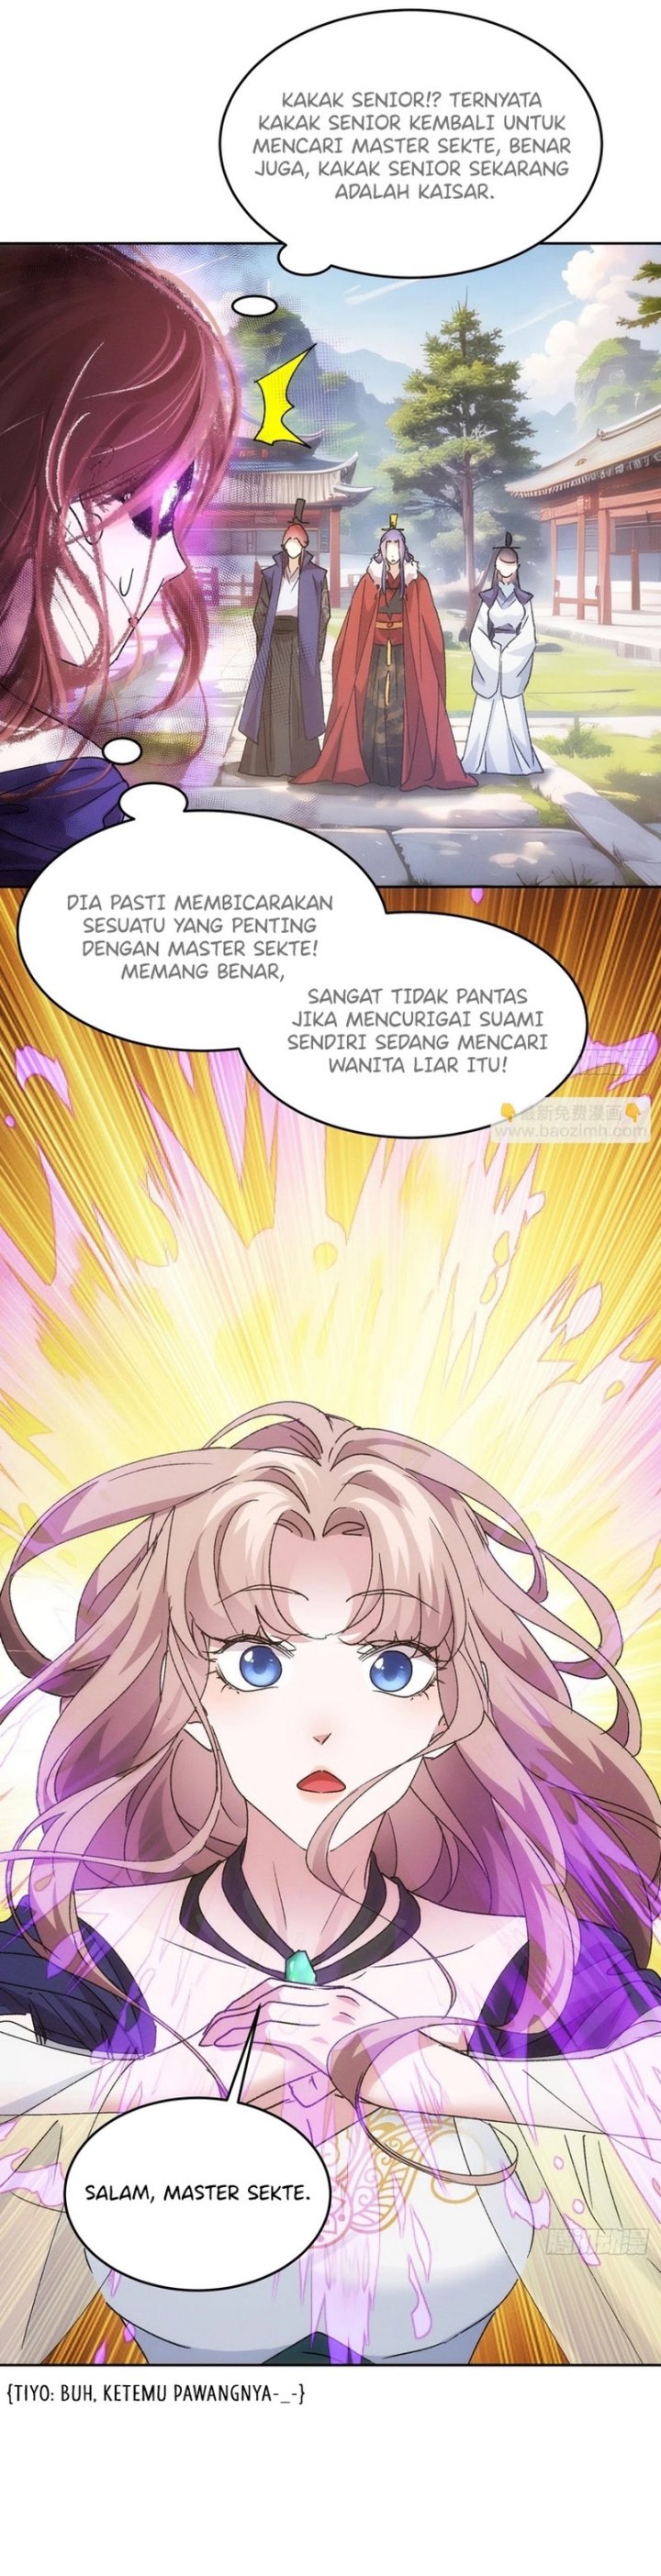 Dilarang COPAS - situs resmi www.mangacanblog.com - Komik i just dont play the card according to the routine 187 - chapter 187 188 Indonesia i just dont play the card according to the routine 187 - chapter 187 Terbaru 11|Baca Manga Komik Indonesia|Mangacan